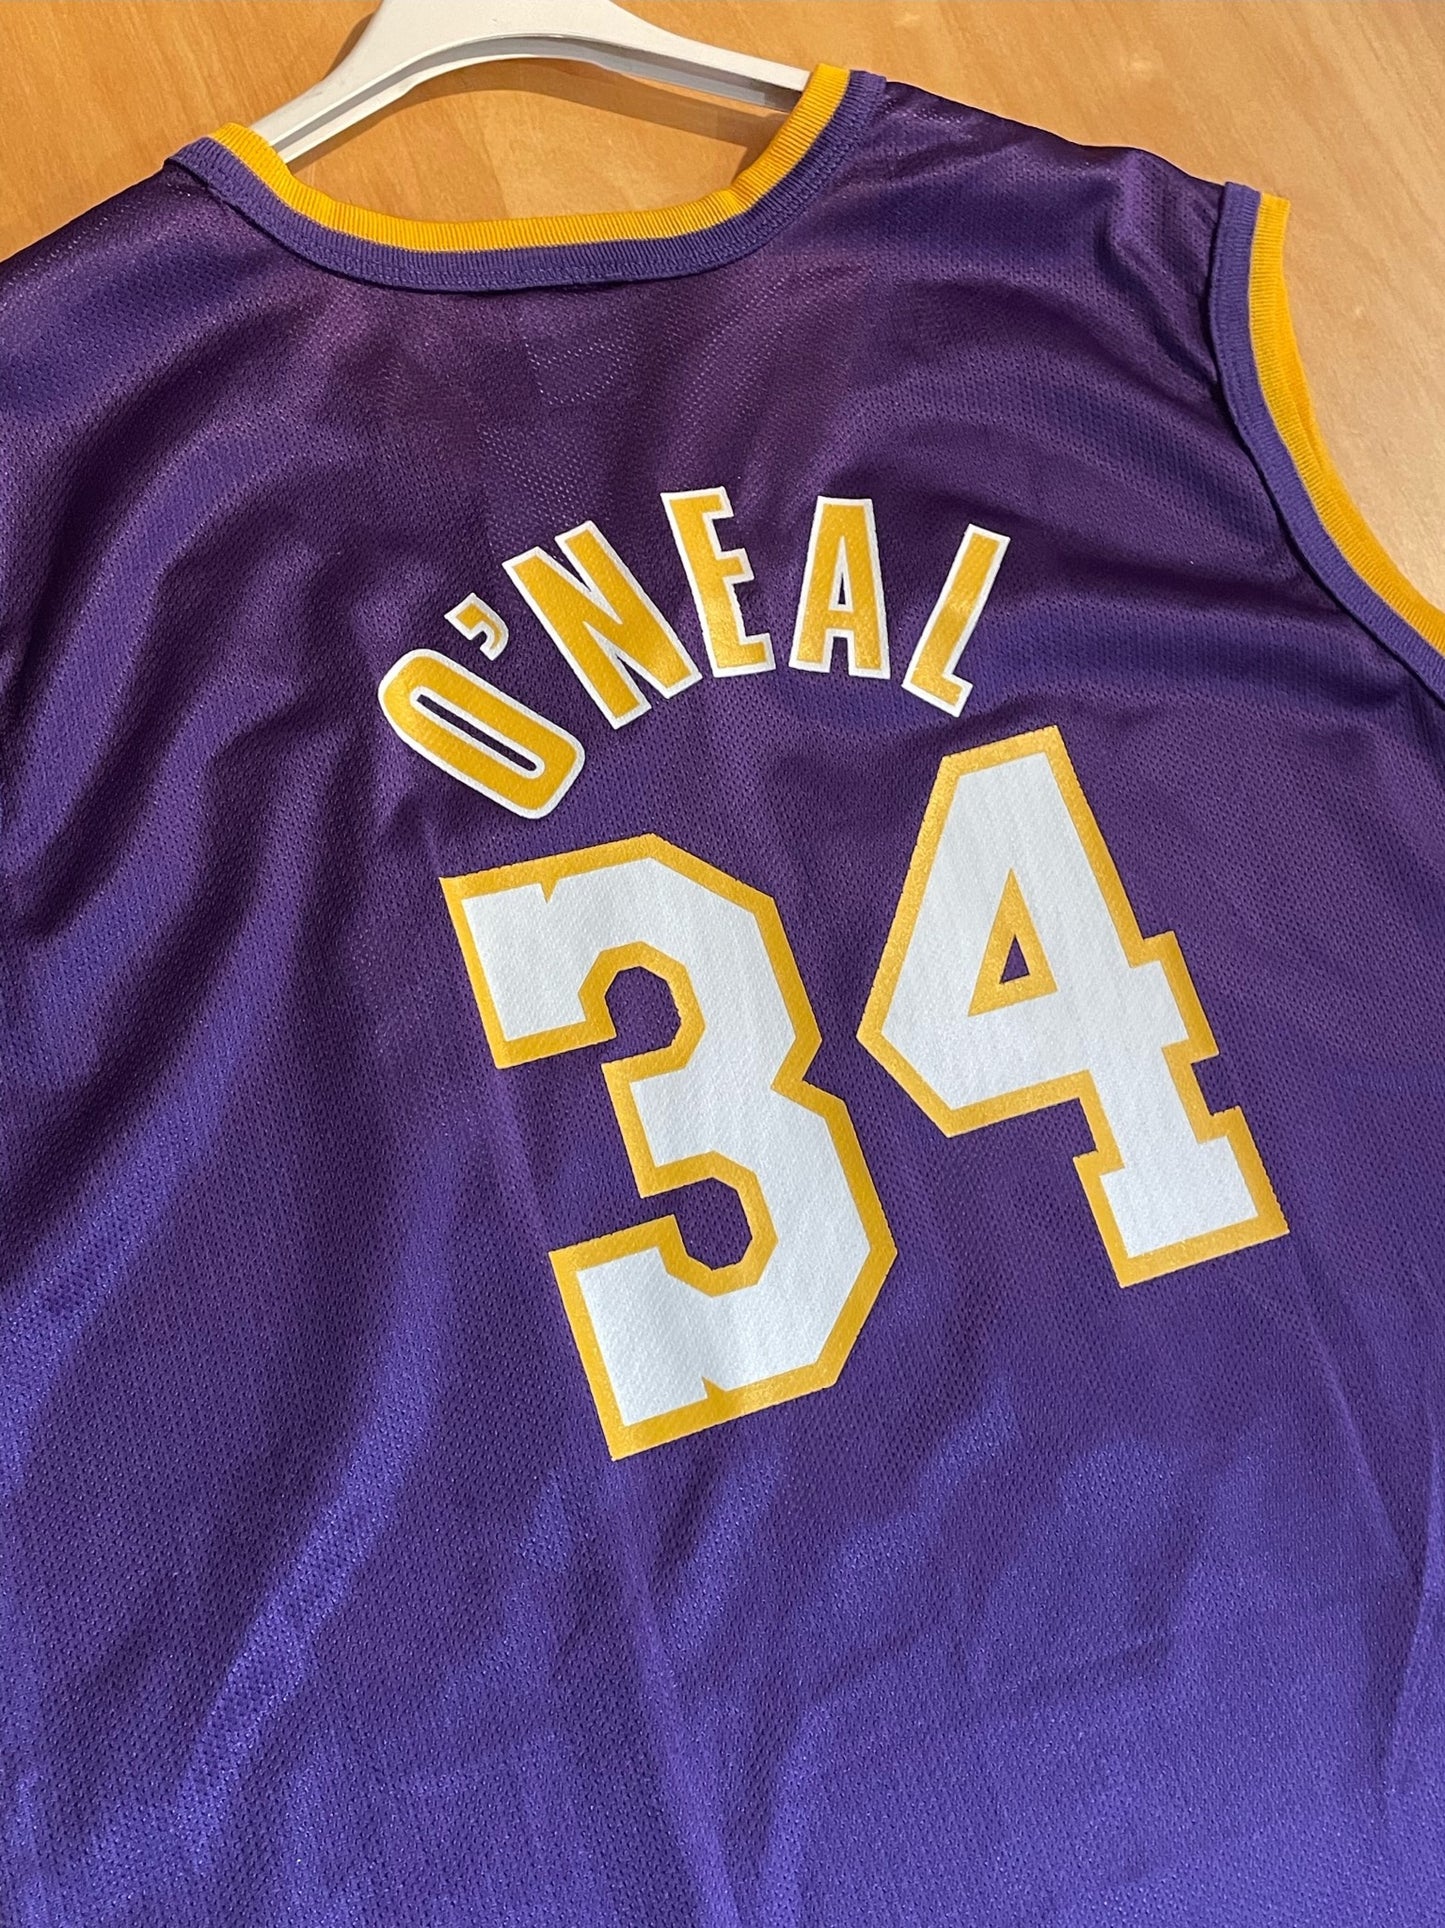 VINTAGE CHAMPION LOS ANGELES LAKERS "SHAQUILLE O'NEAL" NBA JERSEY  SZ: 44